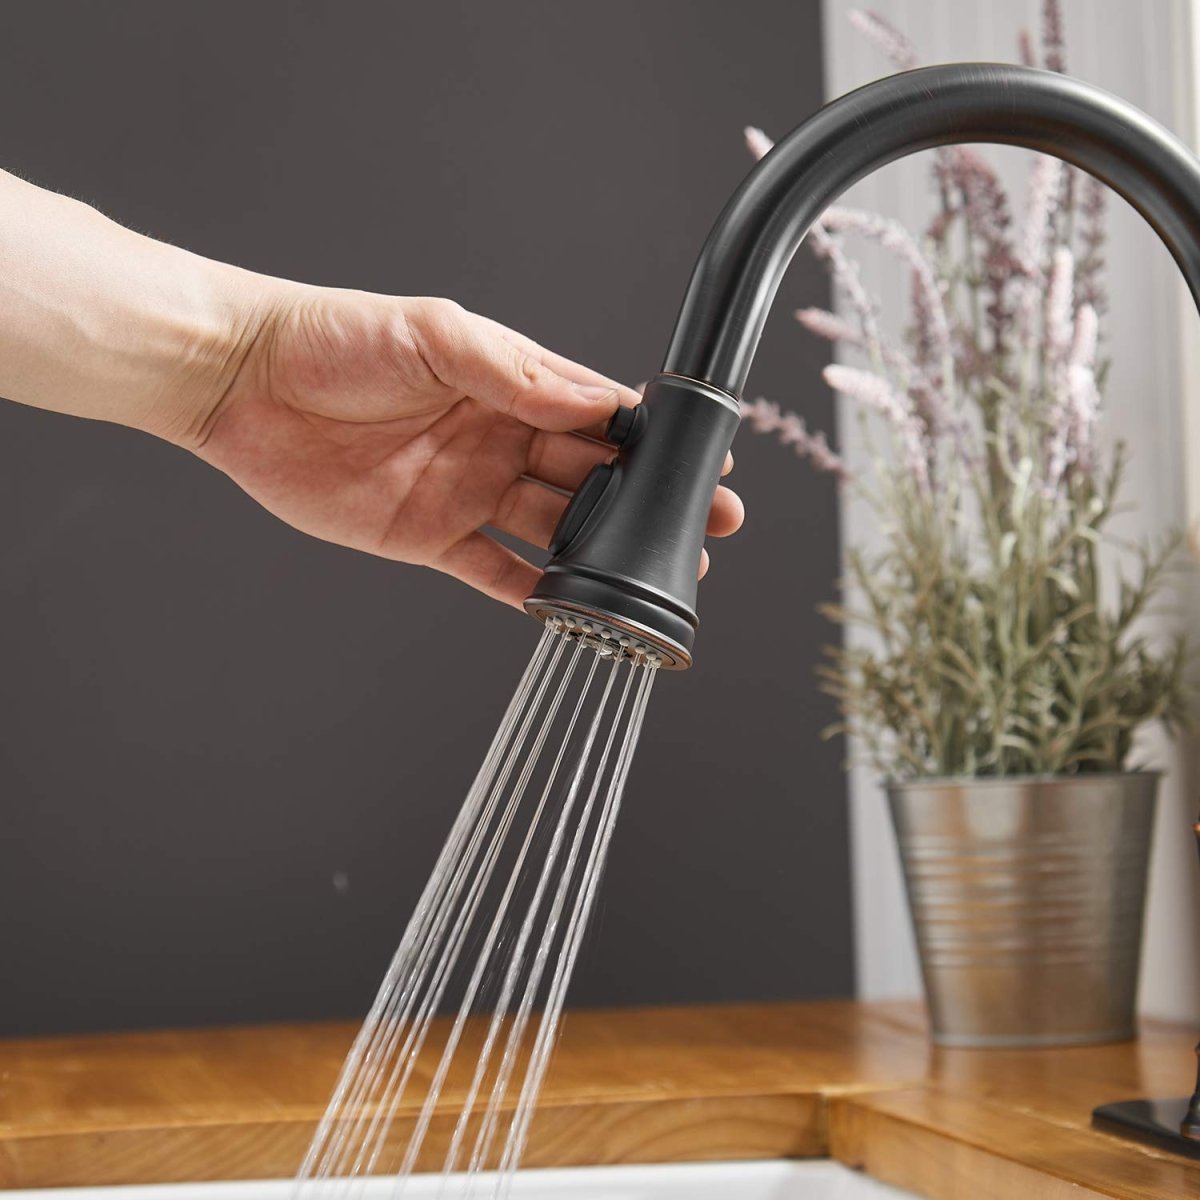 Pull-Out Sprayer 3 Spray Kitchen Faucet Oil Rubbed Bronze-1 - buyfaucet.com